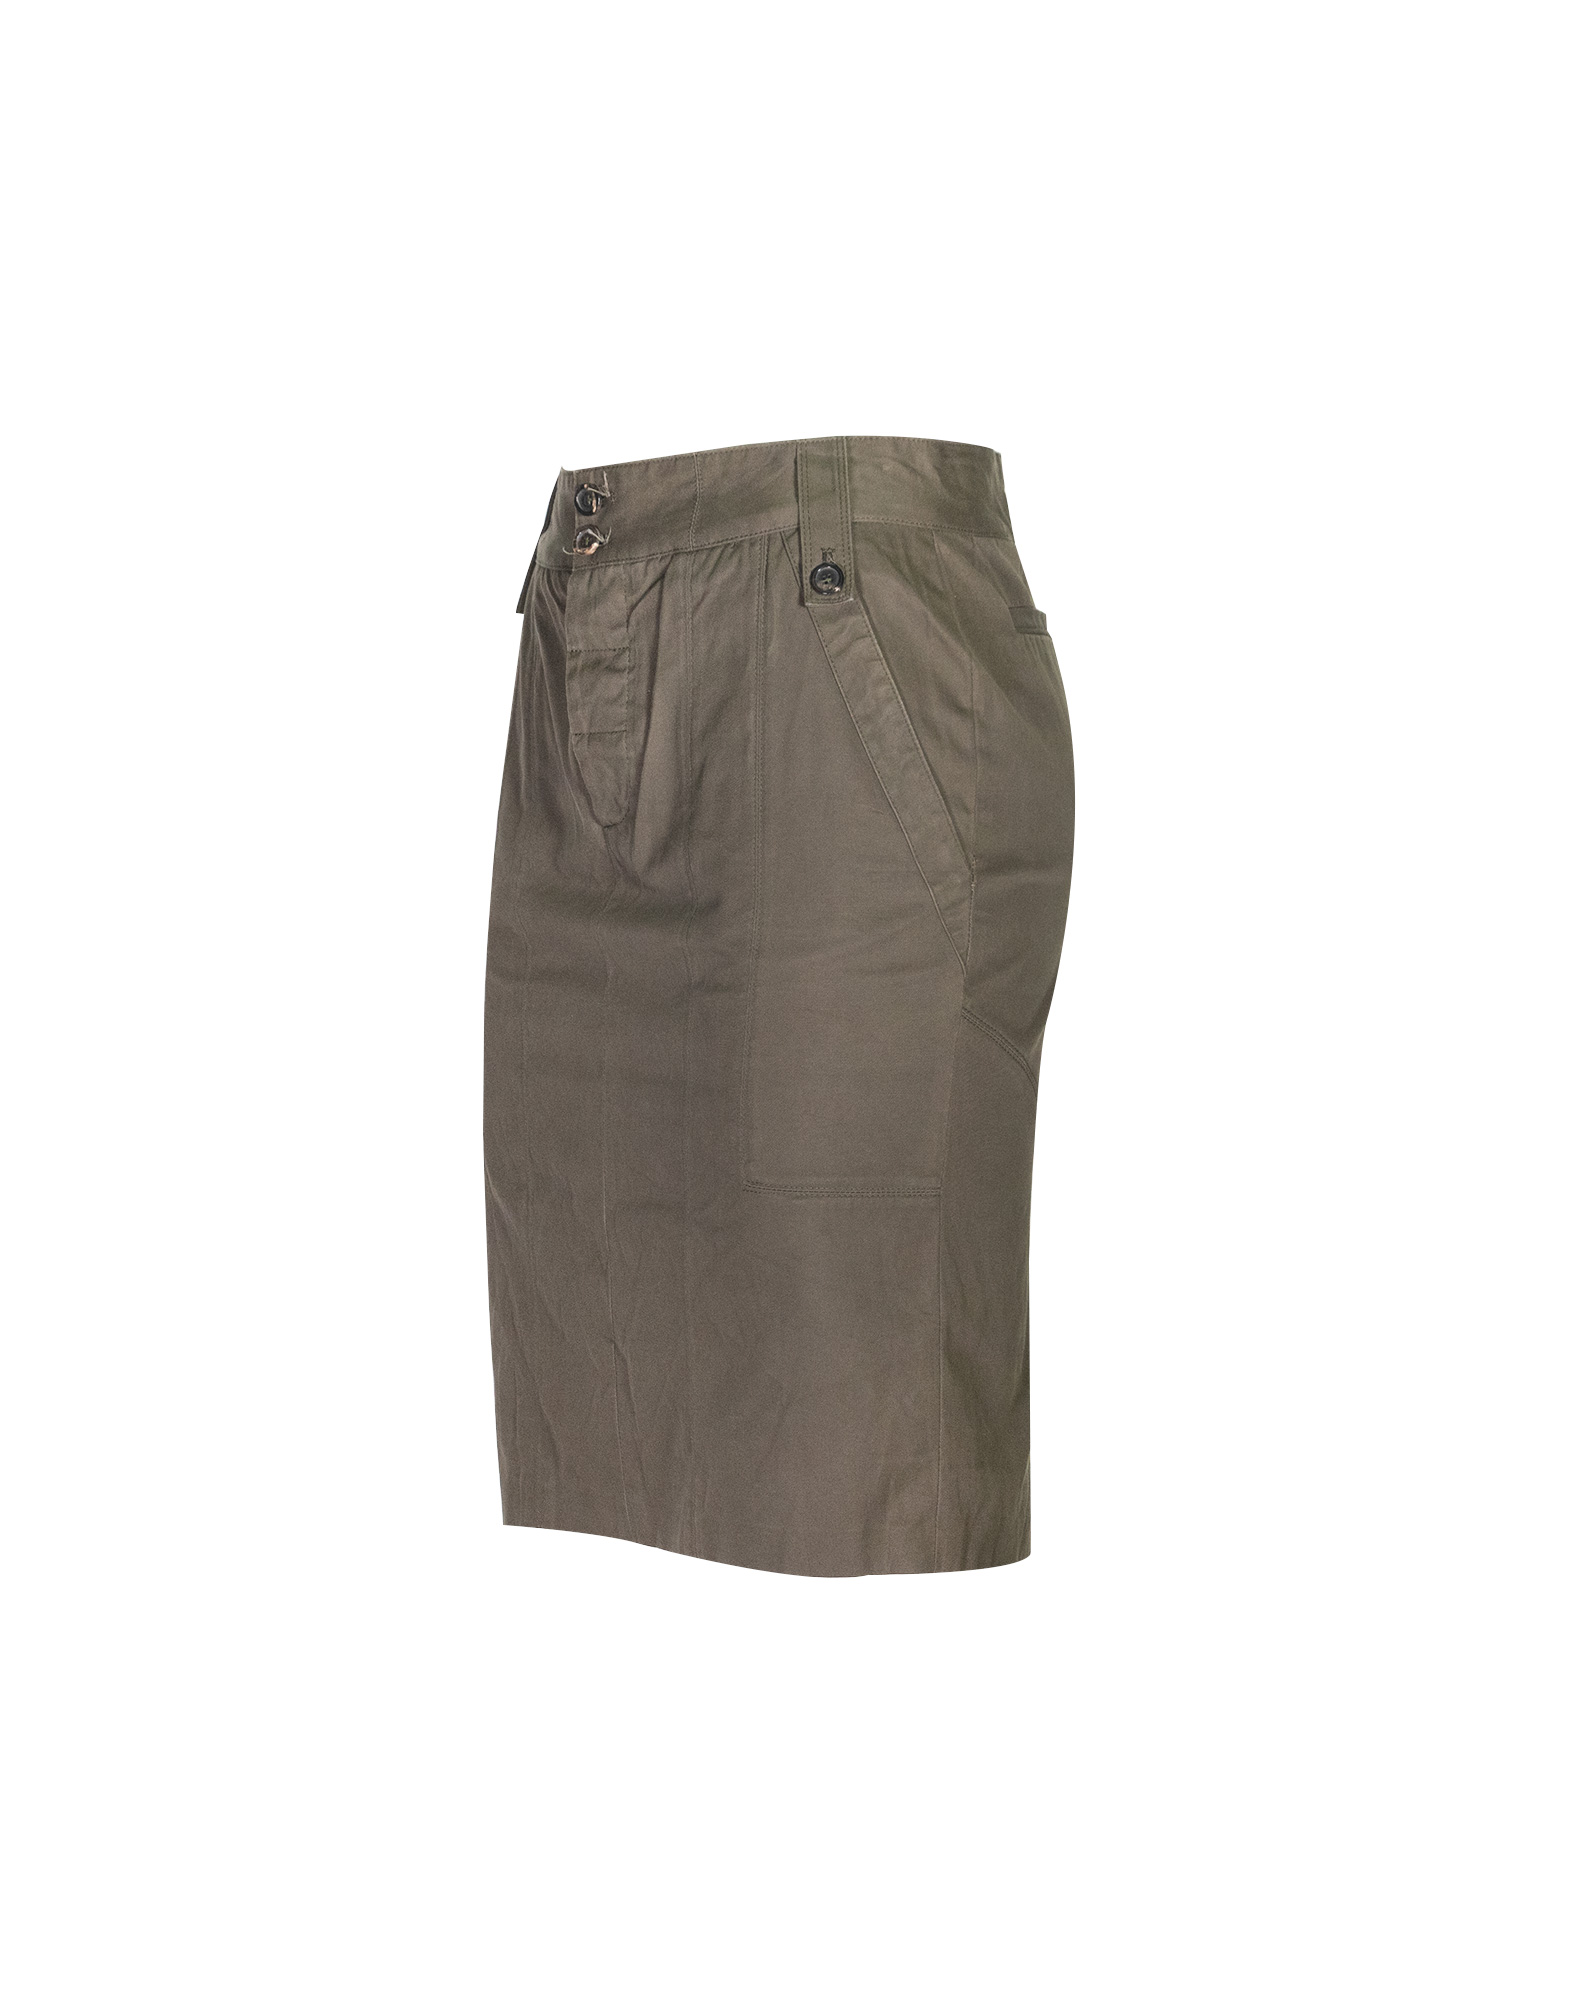 Gucci - Military green cotton skirt